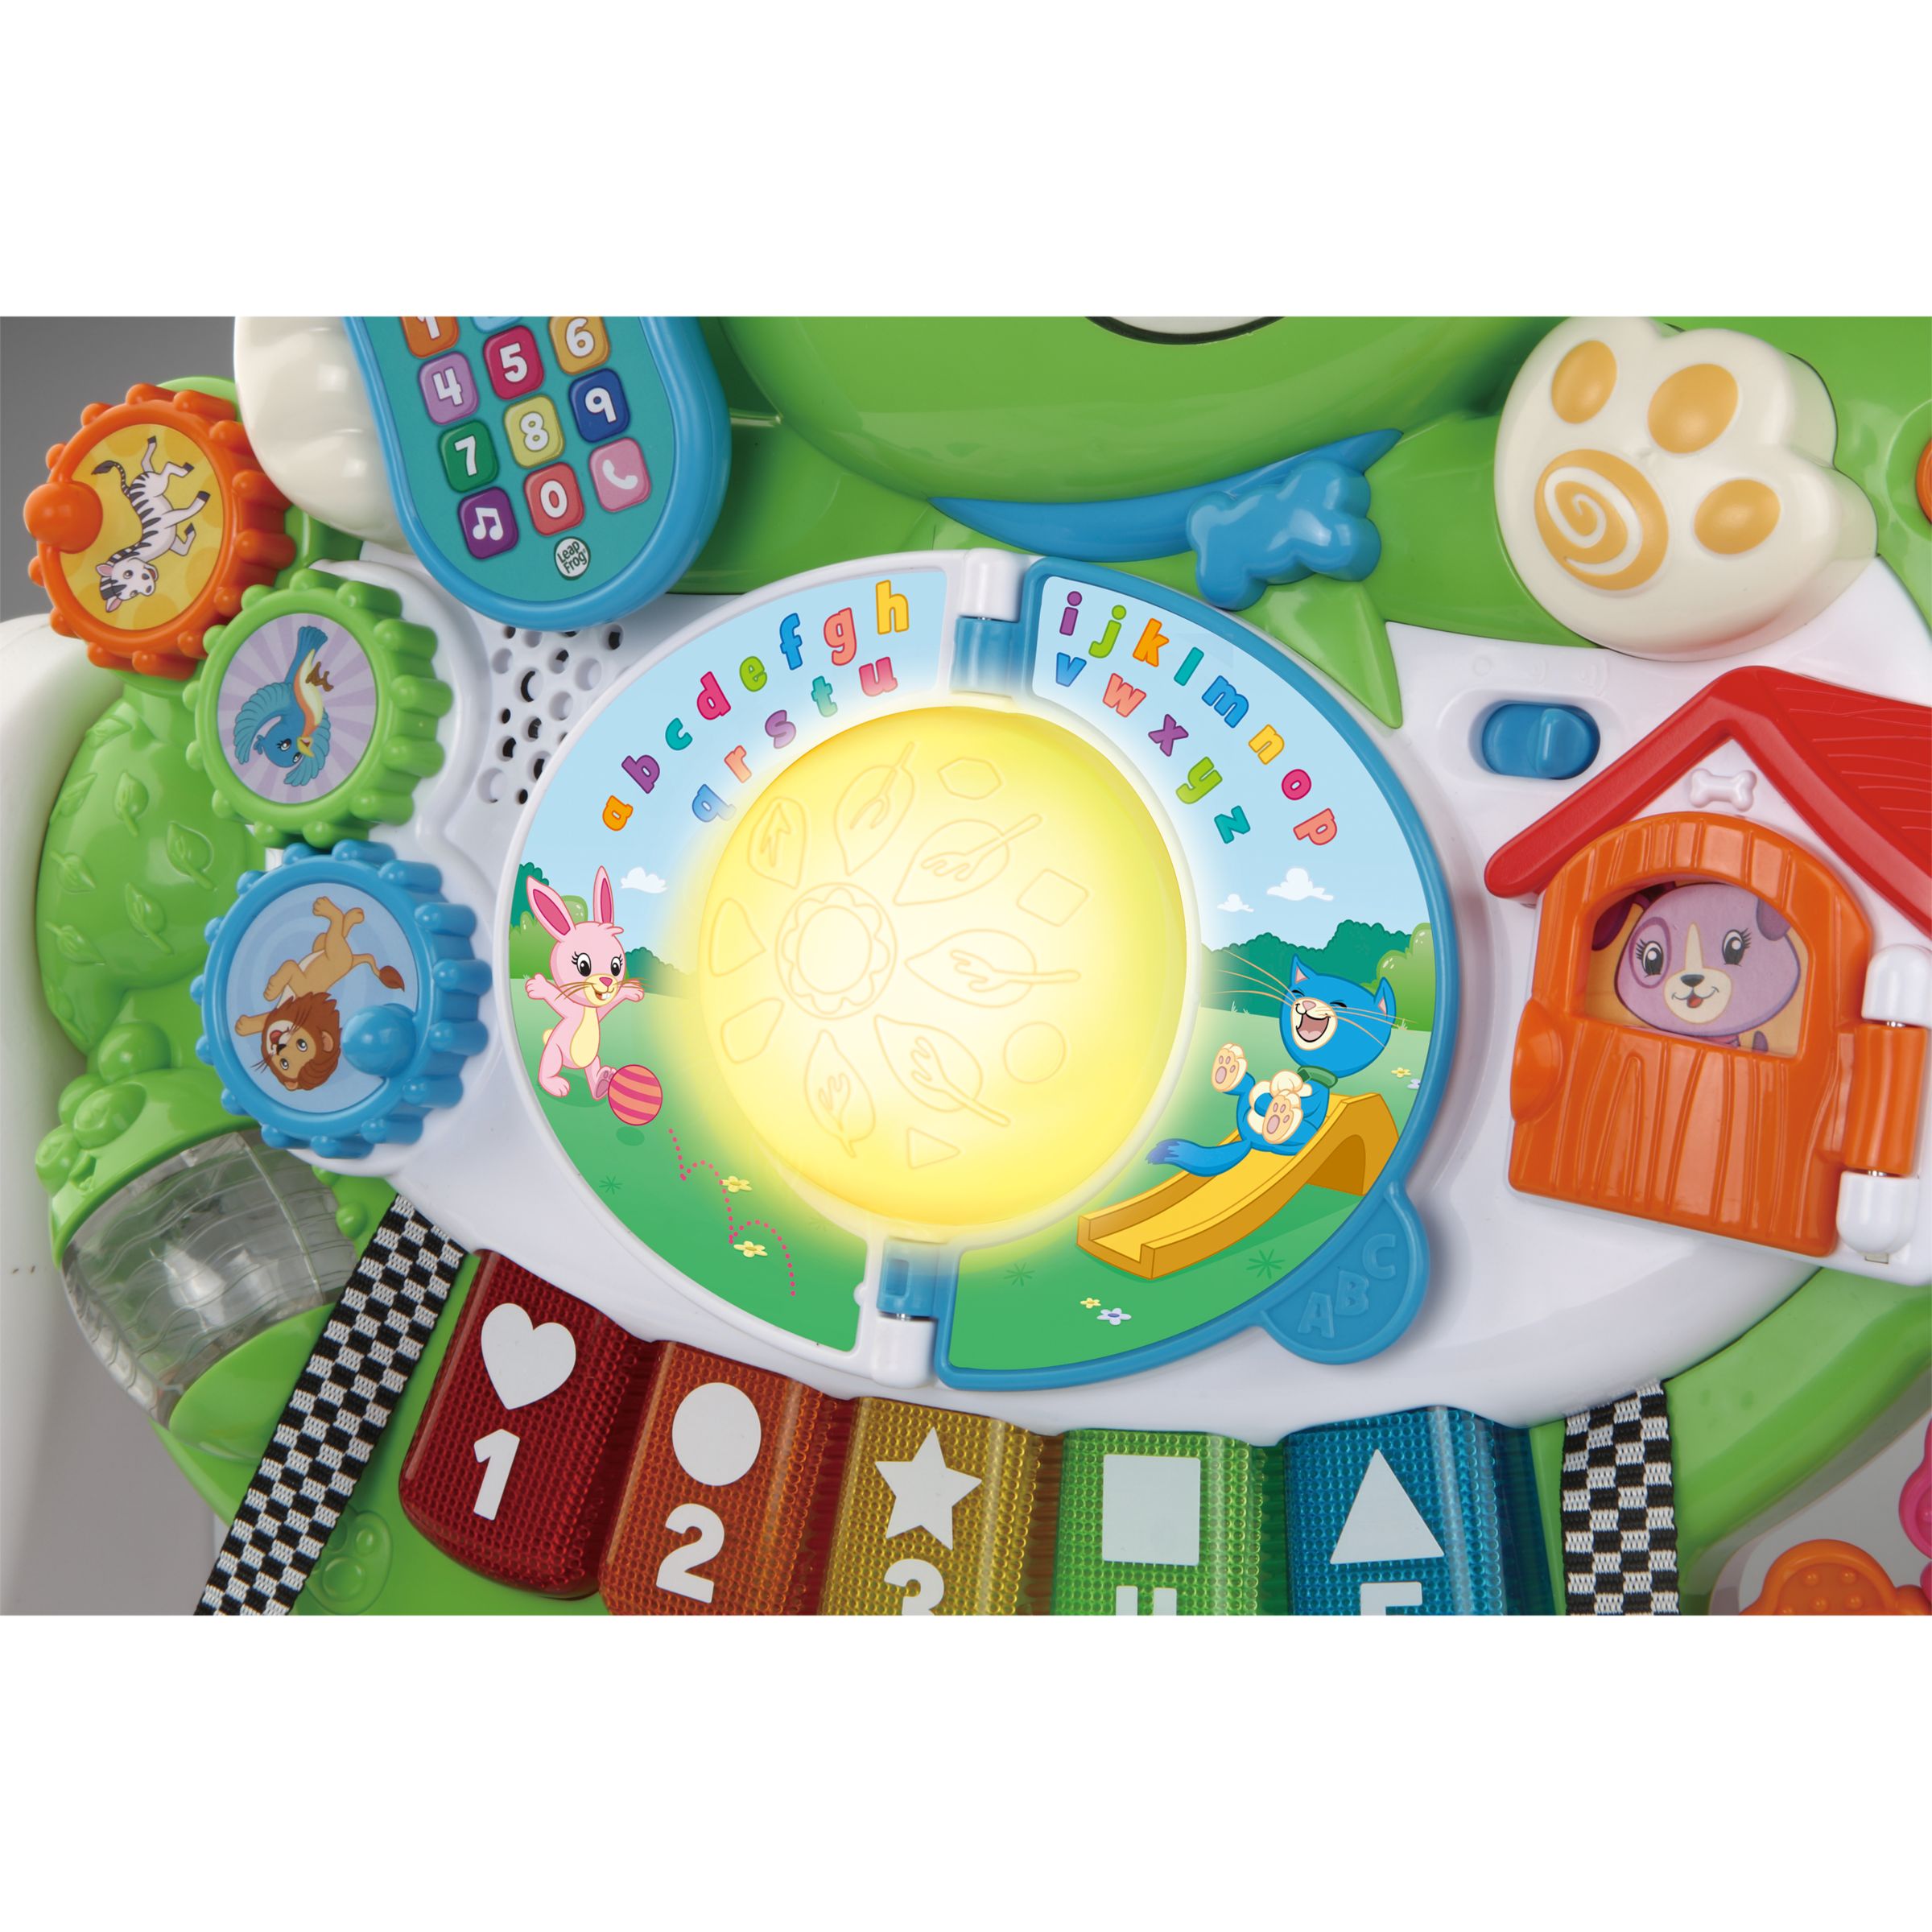 leapfrog get up and go activity centre